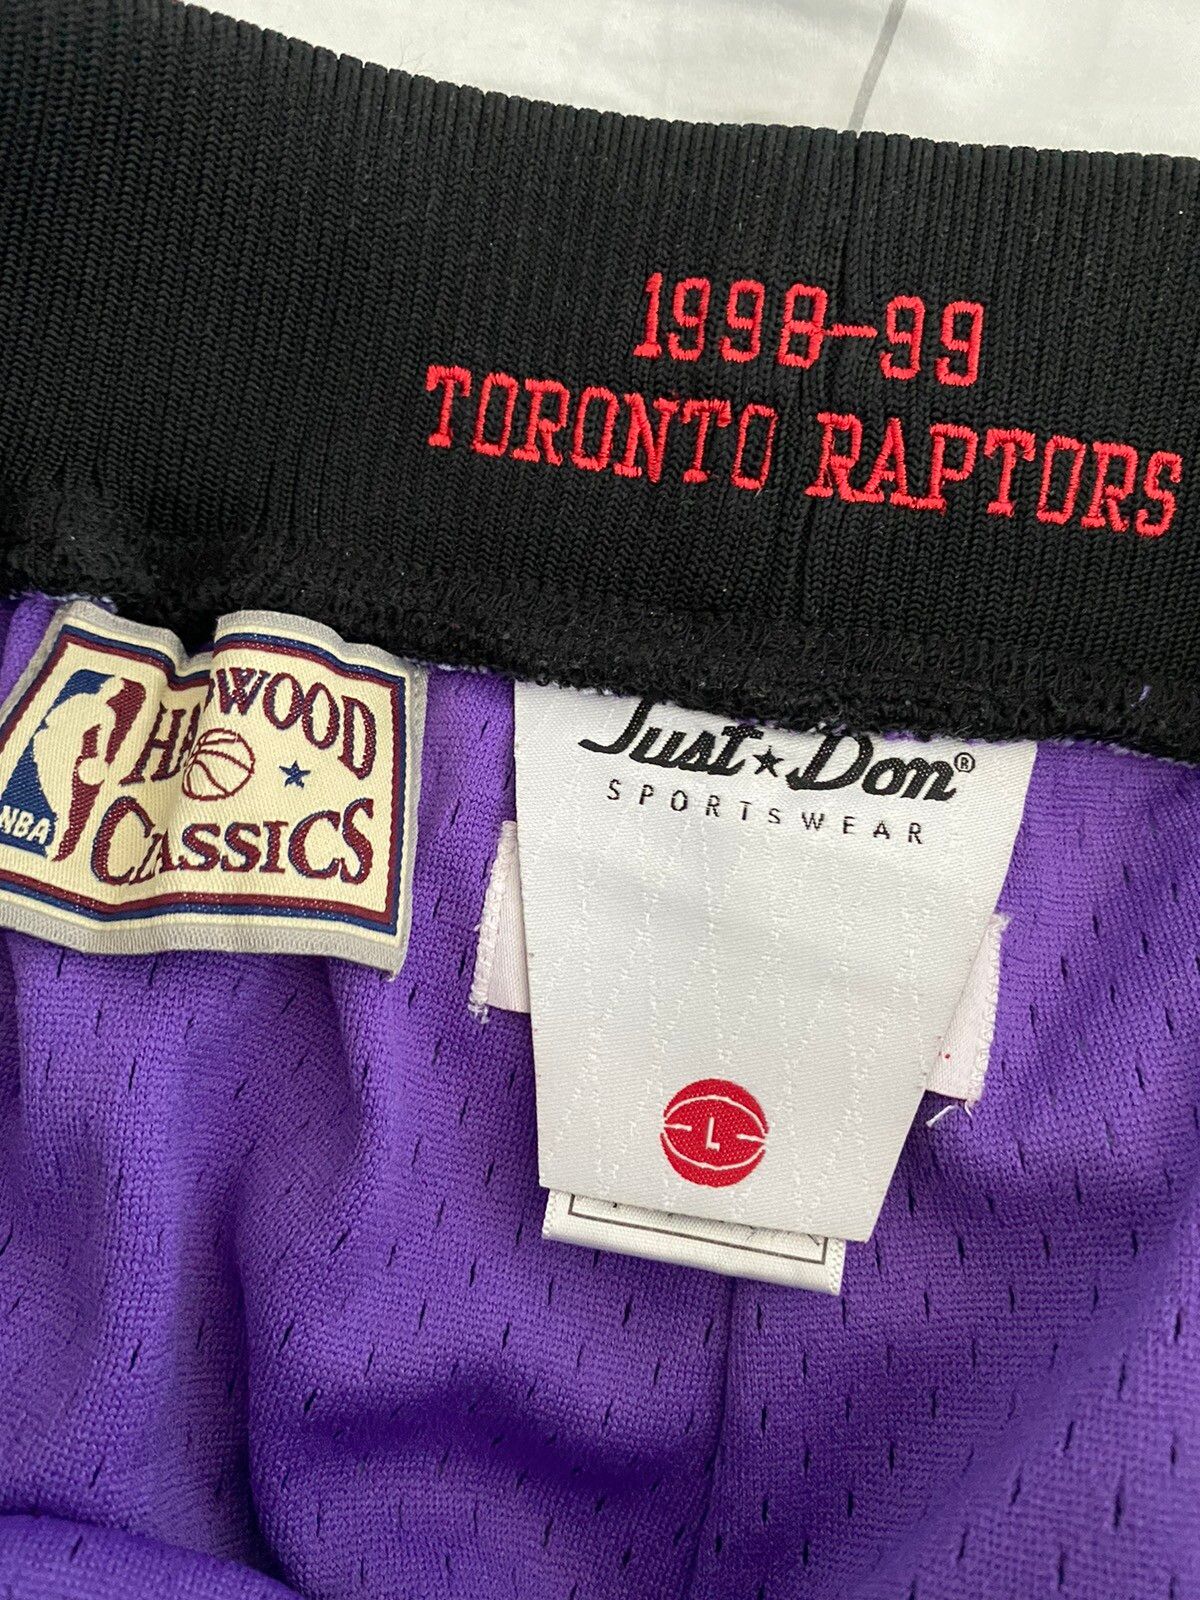 Just Don New Just Don x Mitchell & Ness Toronto Raptors NBA Shorts Size US 34 / EU 50 - 3 Preview